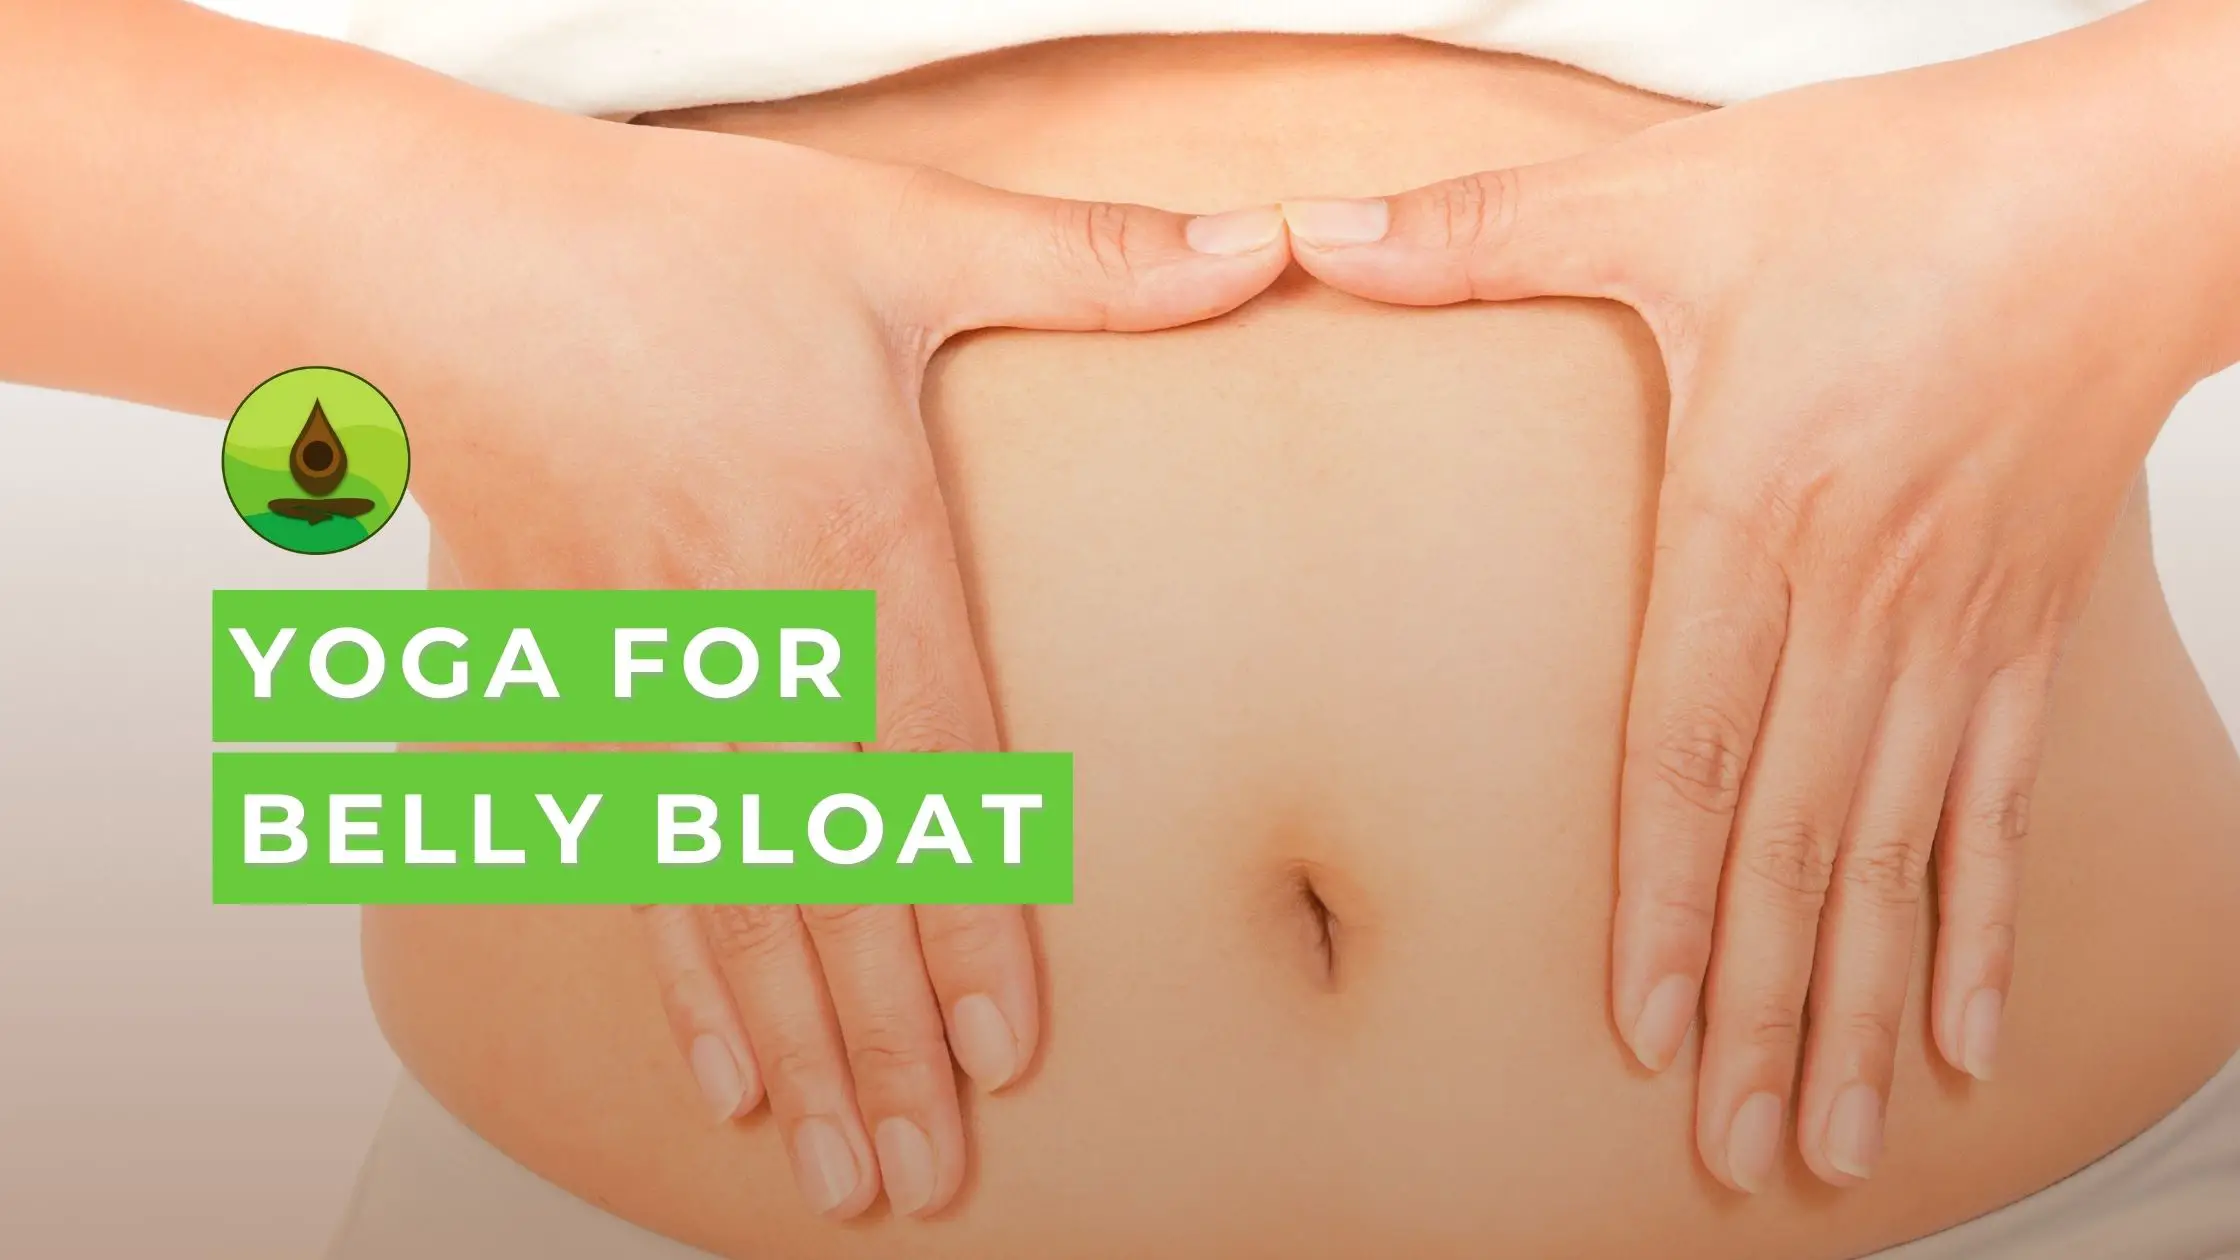 YOGA FOR BELLY BLOAT